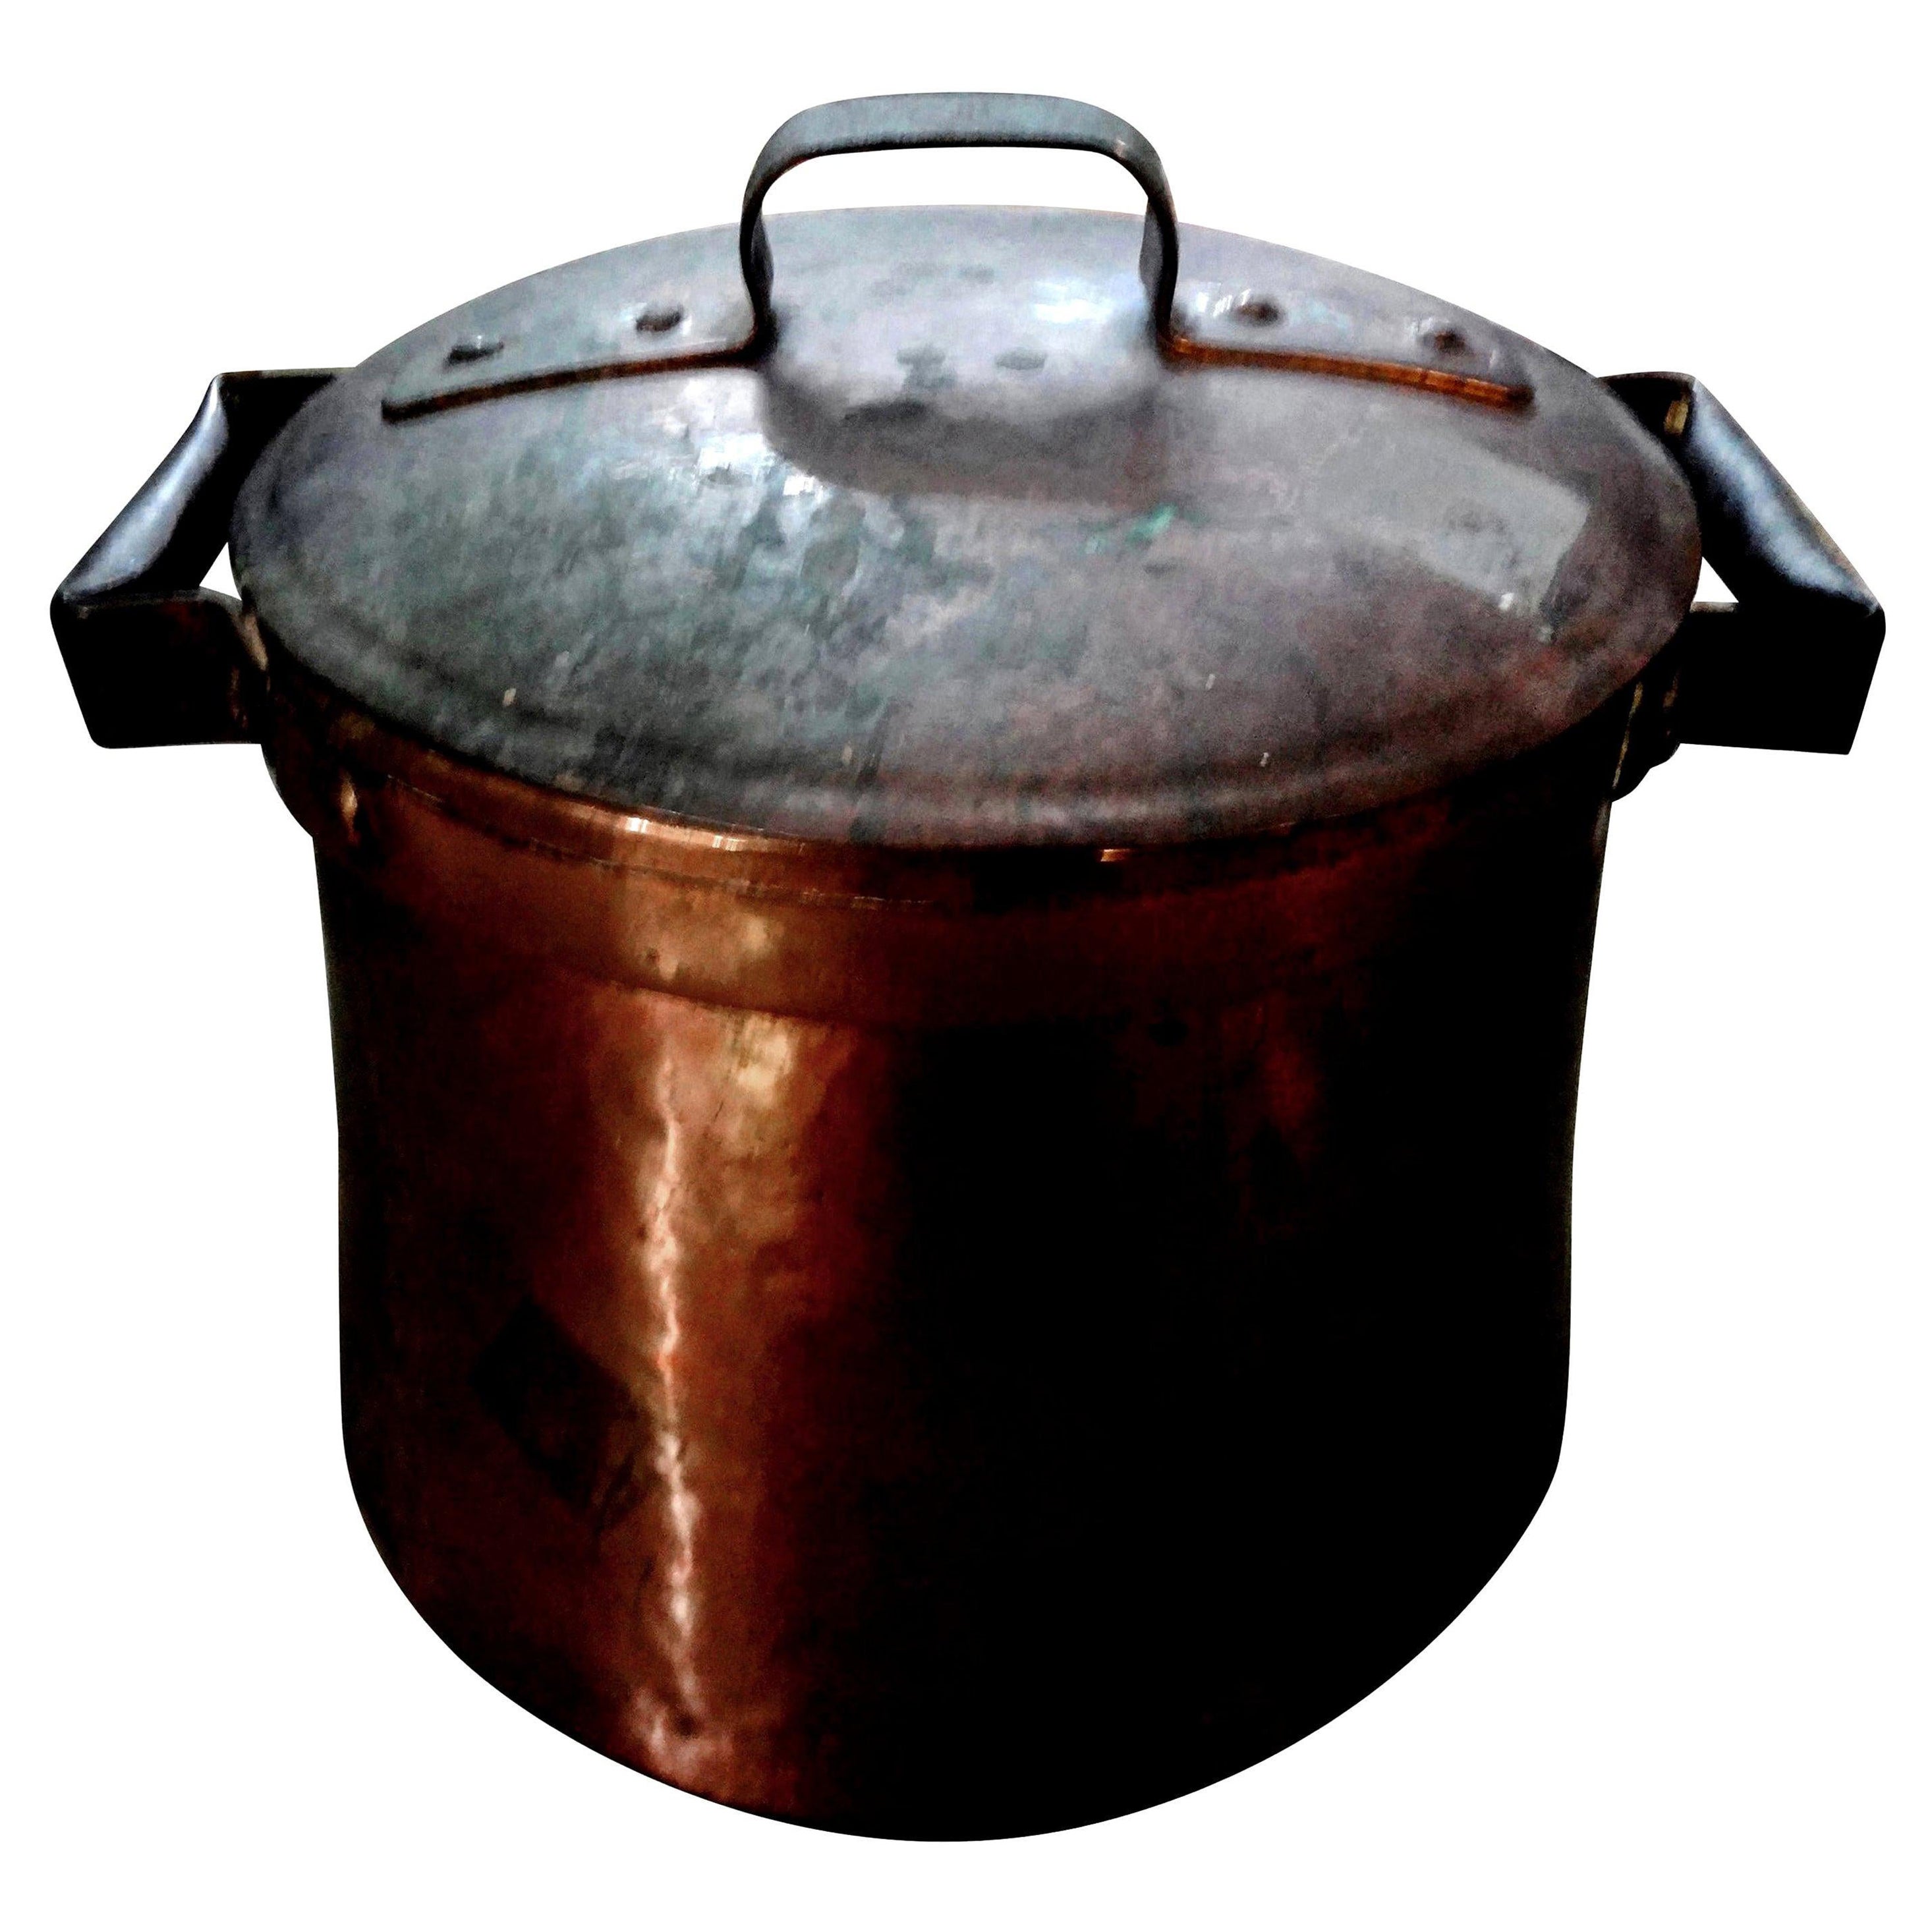 19th century French copper pot with lid.
Beautiful 19th century French Provincial copper cooking pot with original lid. This French piece has not been polished and makes a great decorative accessory, centerpiece or wine cooler.  